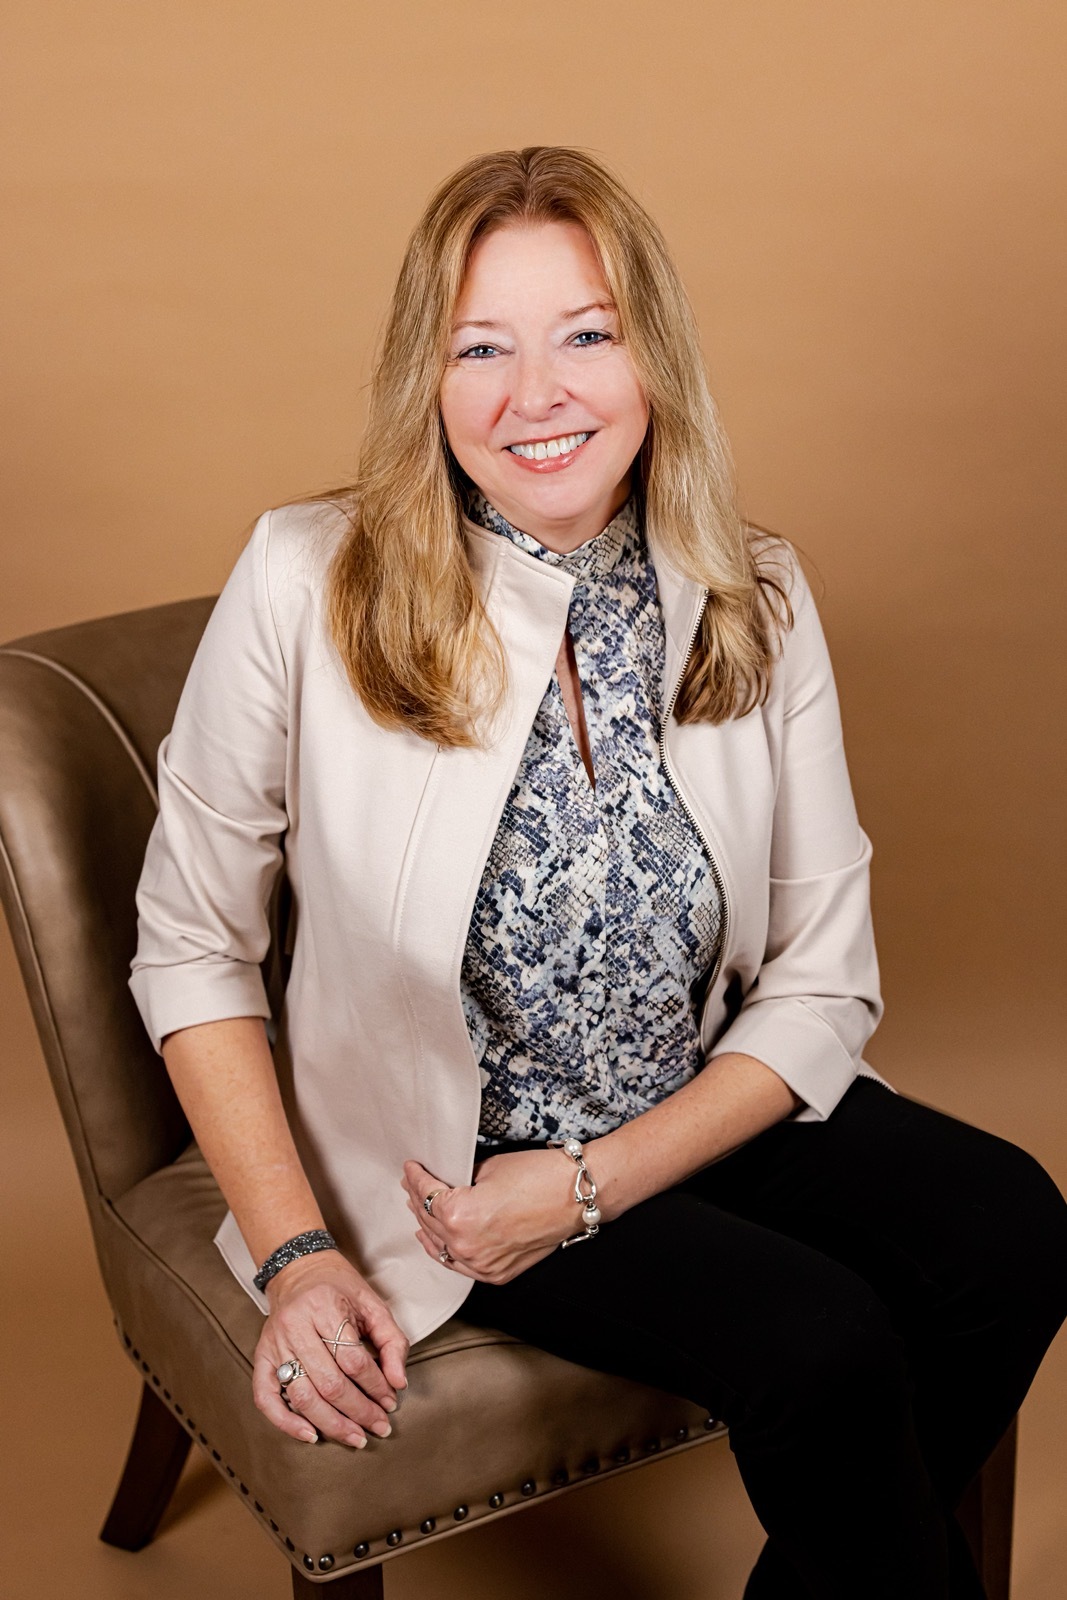 This is a photo of MARY RAWLINS. This professional services JACKSONVILLE, FL 32256 and the surrounding areas.